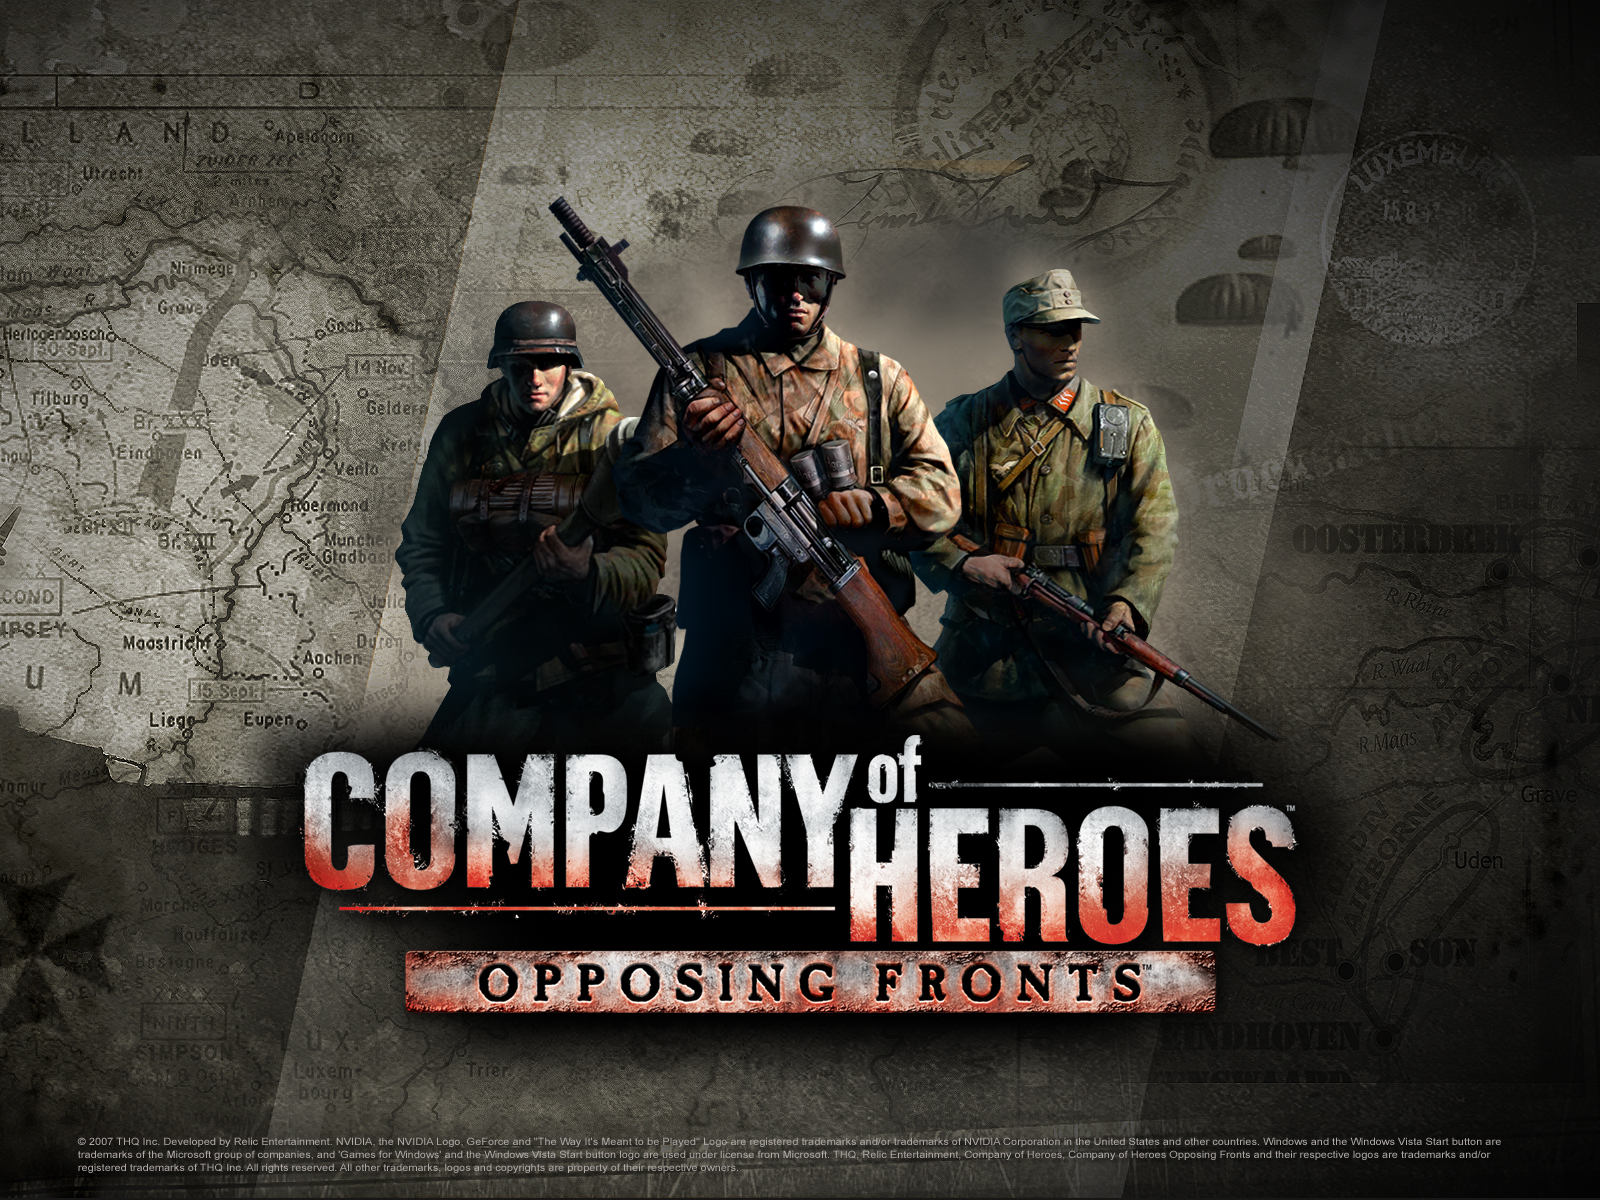 company of heroes wallpaper,soldier,movie,pc game,poster,action film